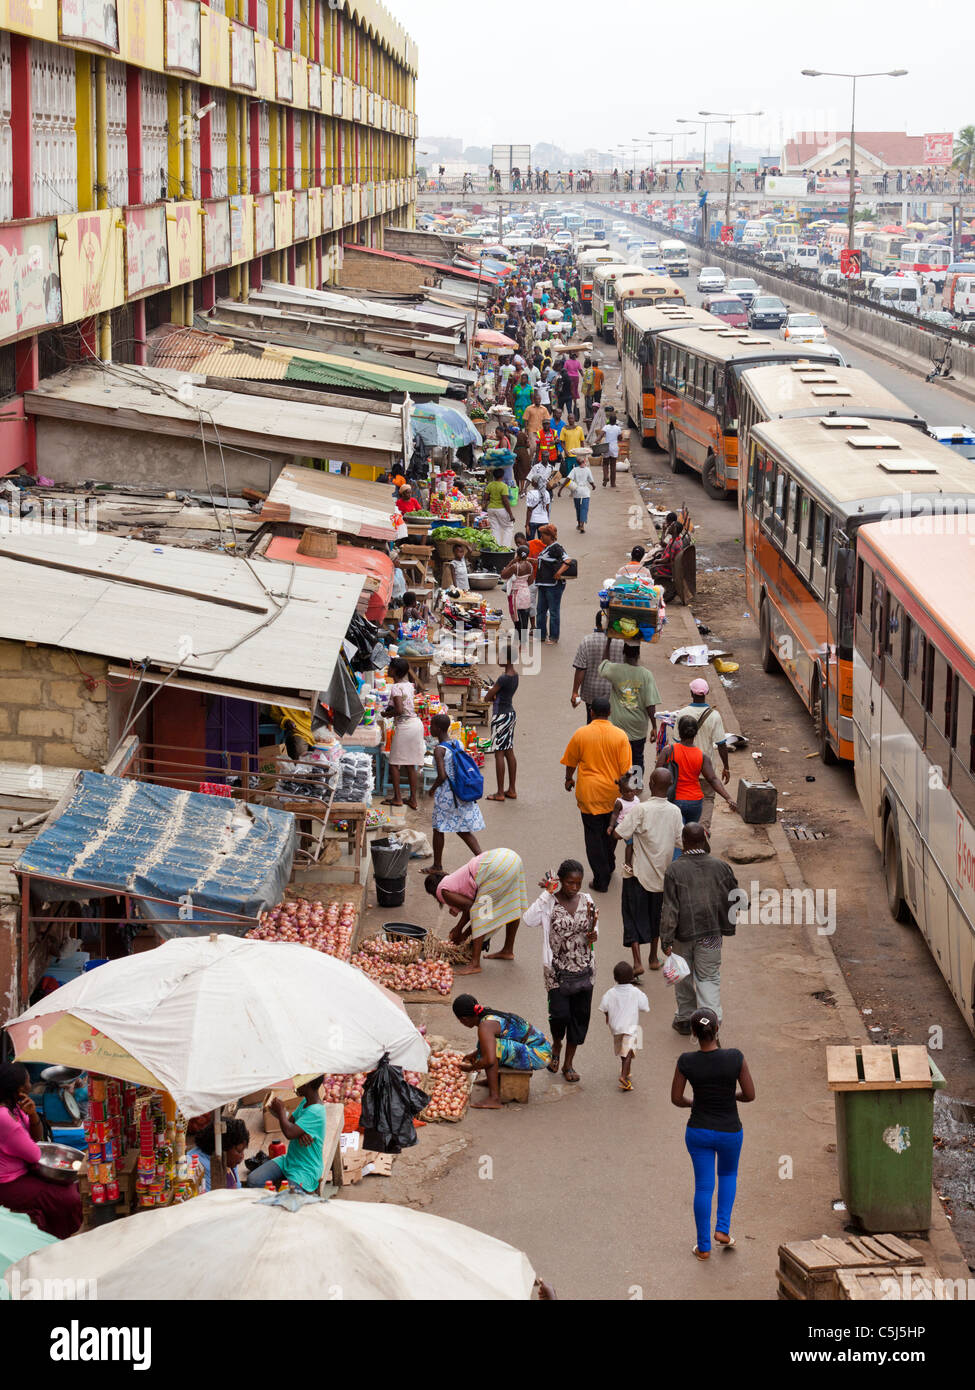 Buses parked in busy market street with stalls, Kaneshie Market, Accra, Ghana Stock Photo